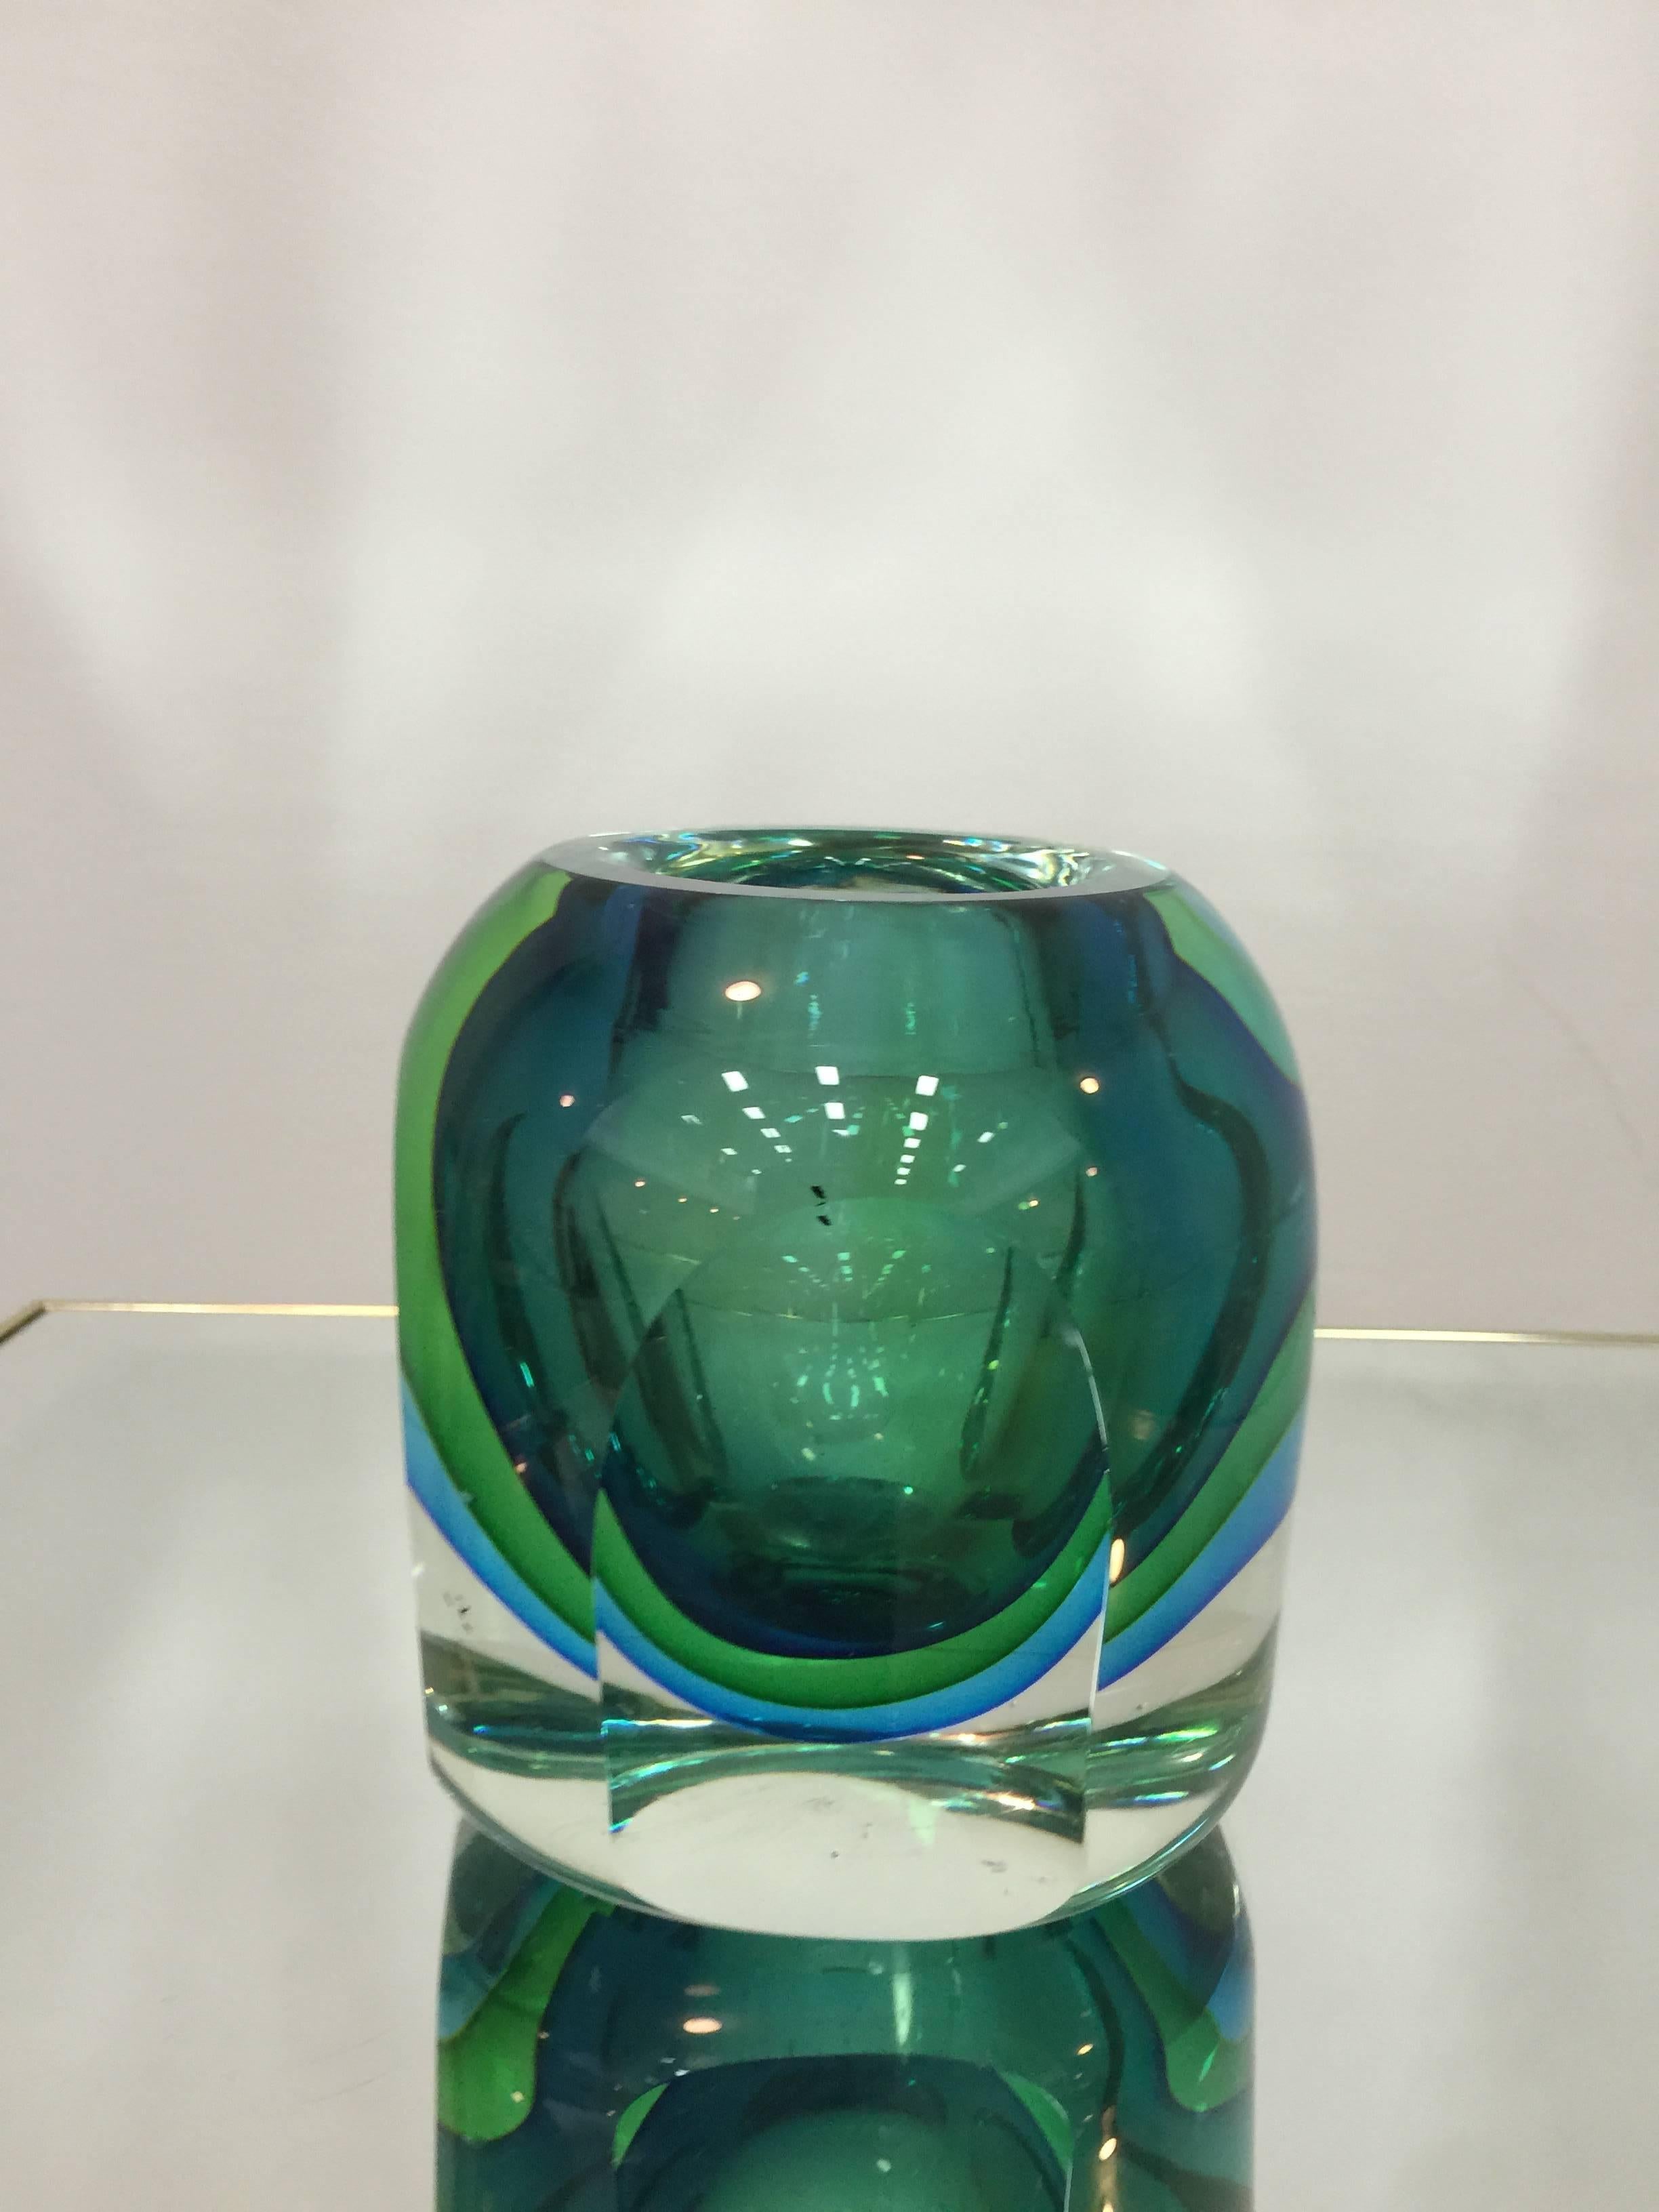 Exceptional bowl or vase in green and blue Murano glass by Flavio Poli for Seguso, circa 1960s